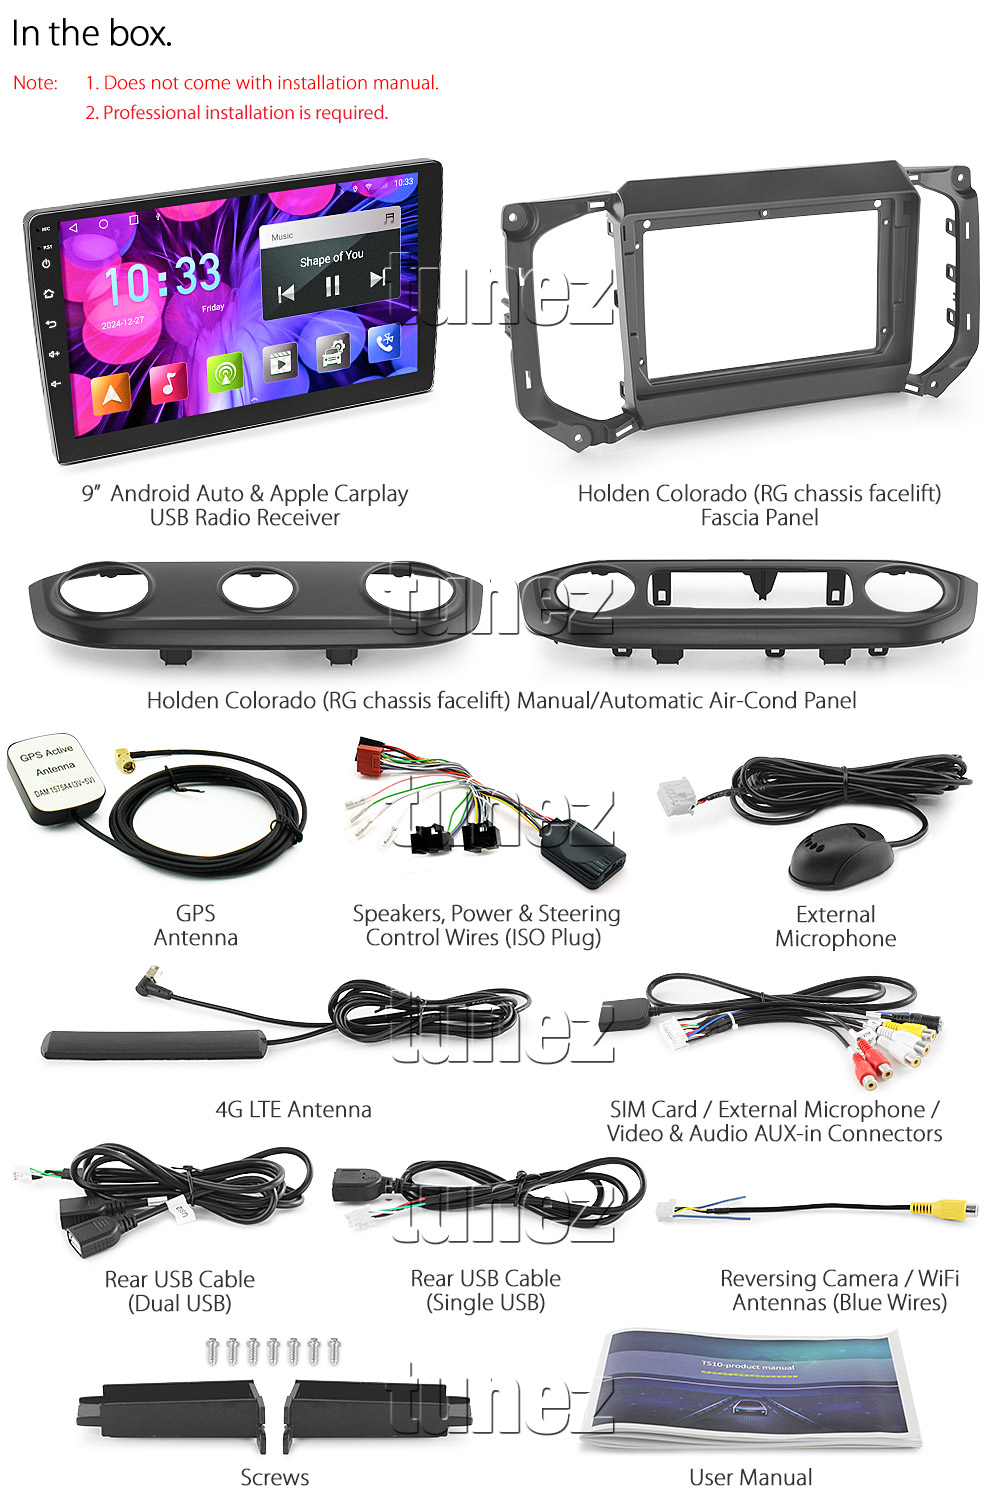 HRC10CP HRC10 GPS Aftermarket Holden Colorado RG Facelift Year 2017 2018 2019 2020 large 9-inch 9' touchscreen Universal Double DIN Latest Australia UK European USA Original CarPlay Android Auto 10 Car USB player radio stereo 4G LTE WiFi head unit details Aftermarket External and Internal Microphone Bluetooth Europe Sat Nav Navi Plug and Play ISO Plug Wiring Harness Matching Fascia Kit Facia Free Reversing Camera Album Art ID3 Tag RMVB MP3 MP4 AVI MKV Full High Definition FHD MyLink My Link 1080p DAB+ Digital Radio DAB + Connects2